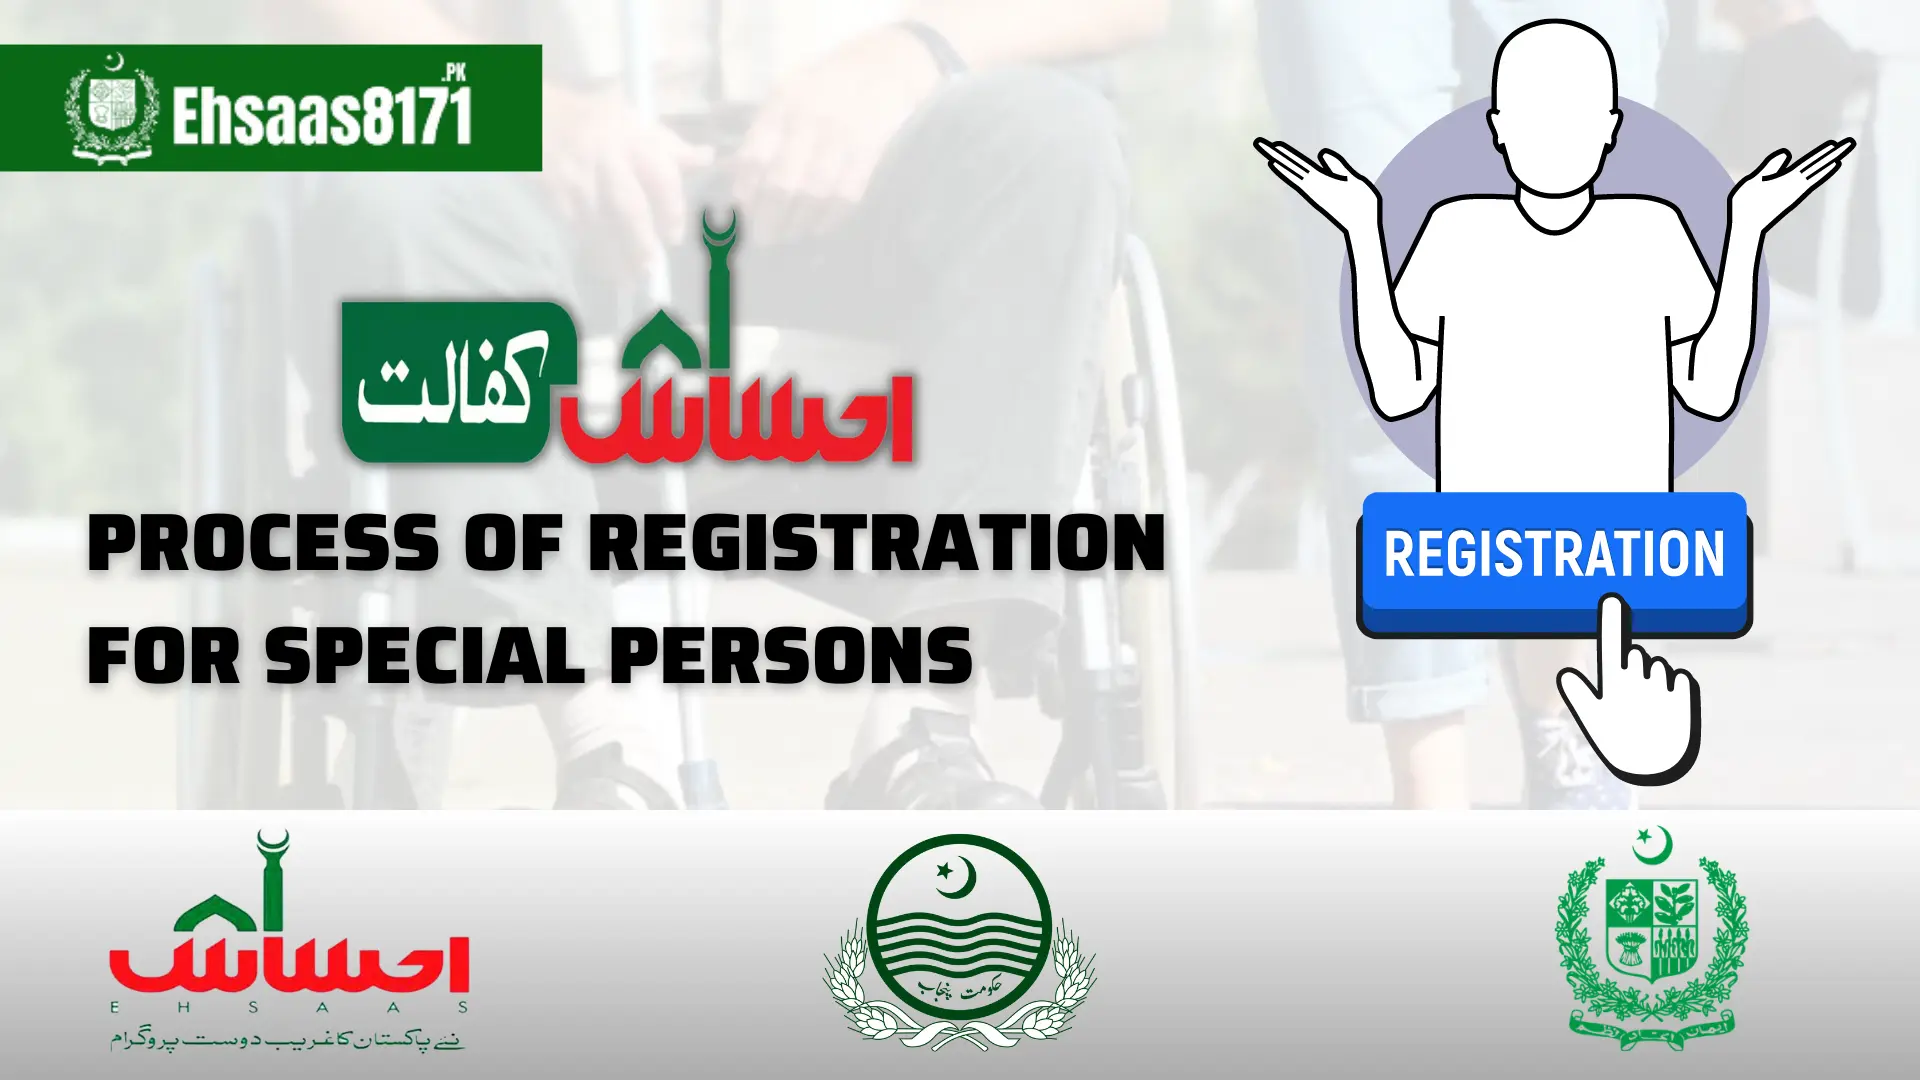 Process of registration for special persons